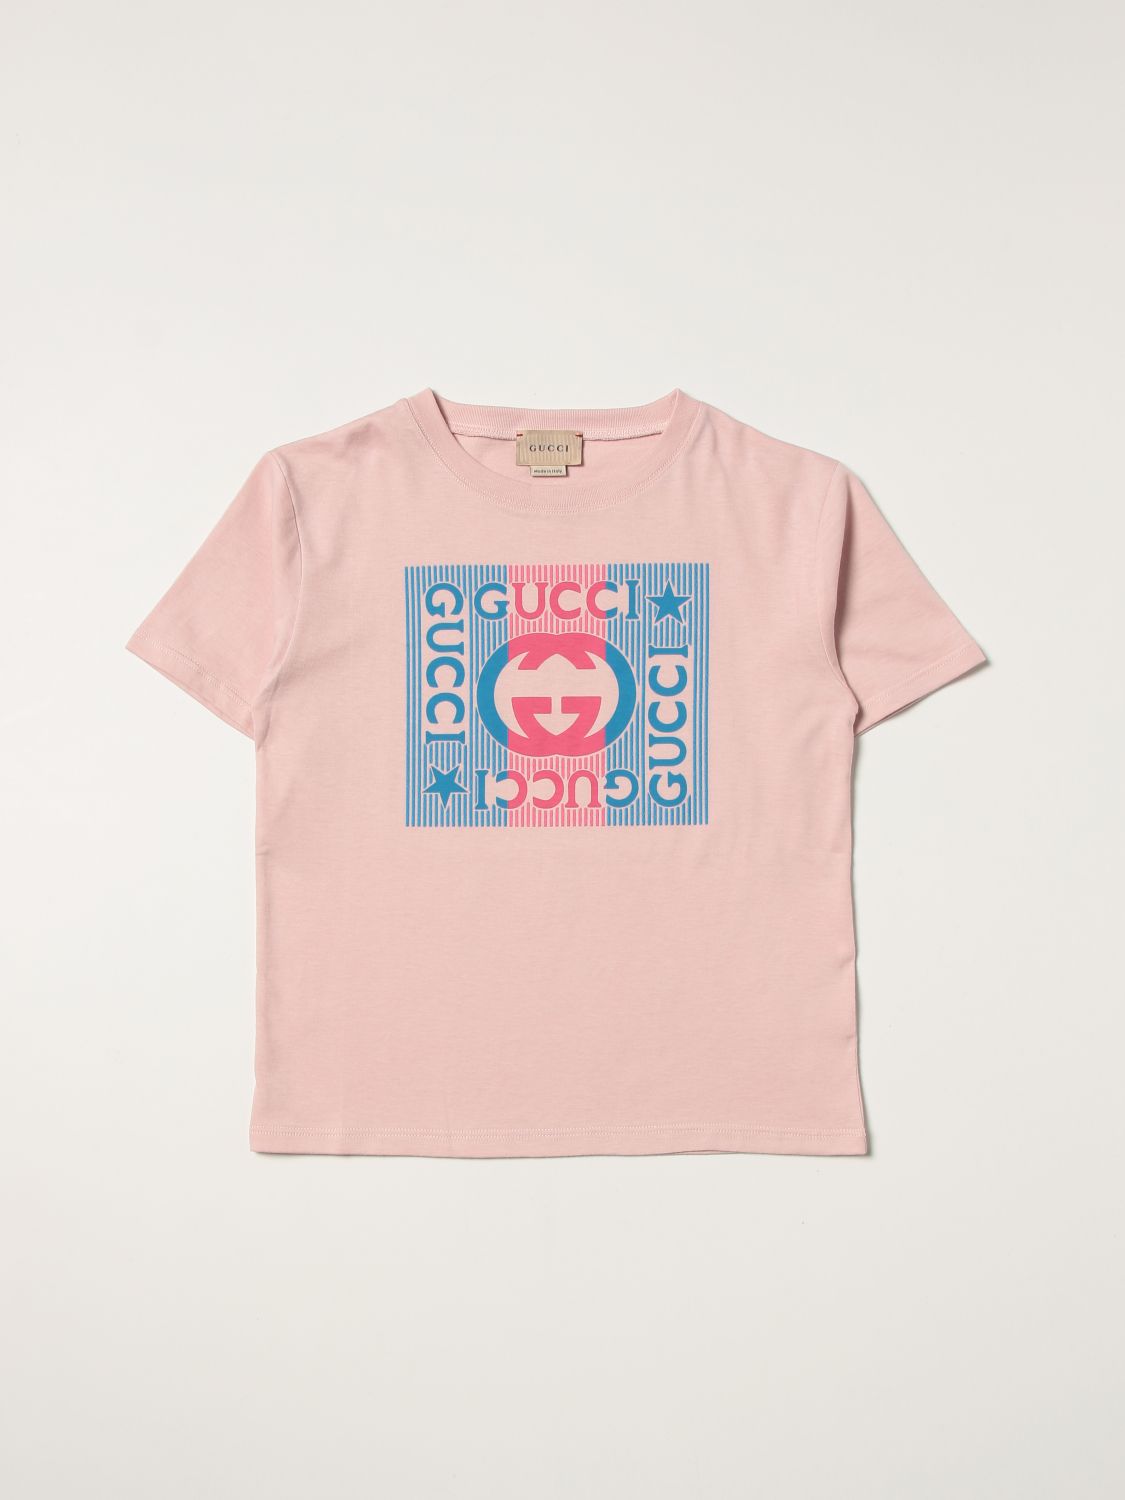 GUCCI: cotton t-shirt with logo and print - Pink | Gucci t-shirt ...